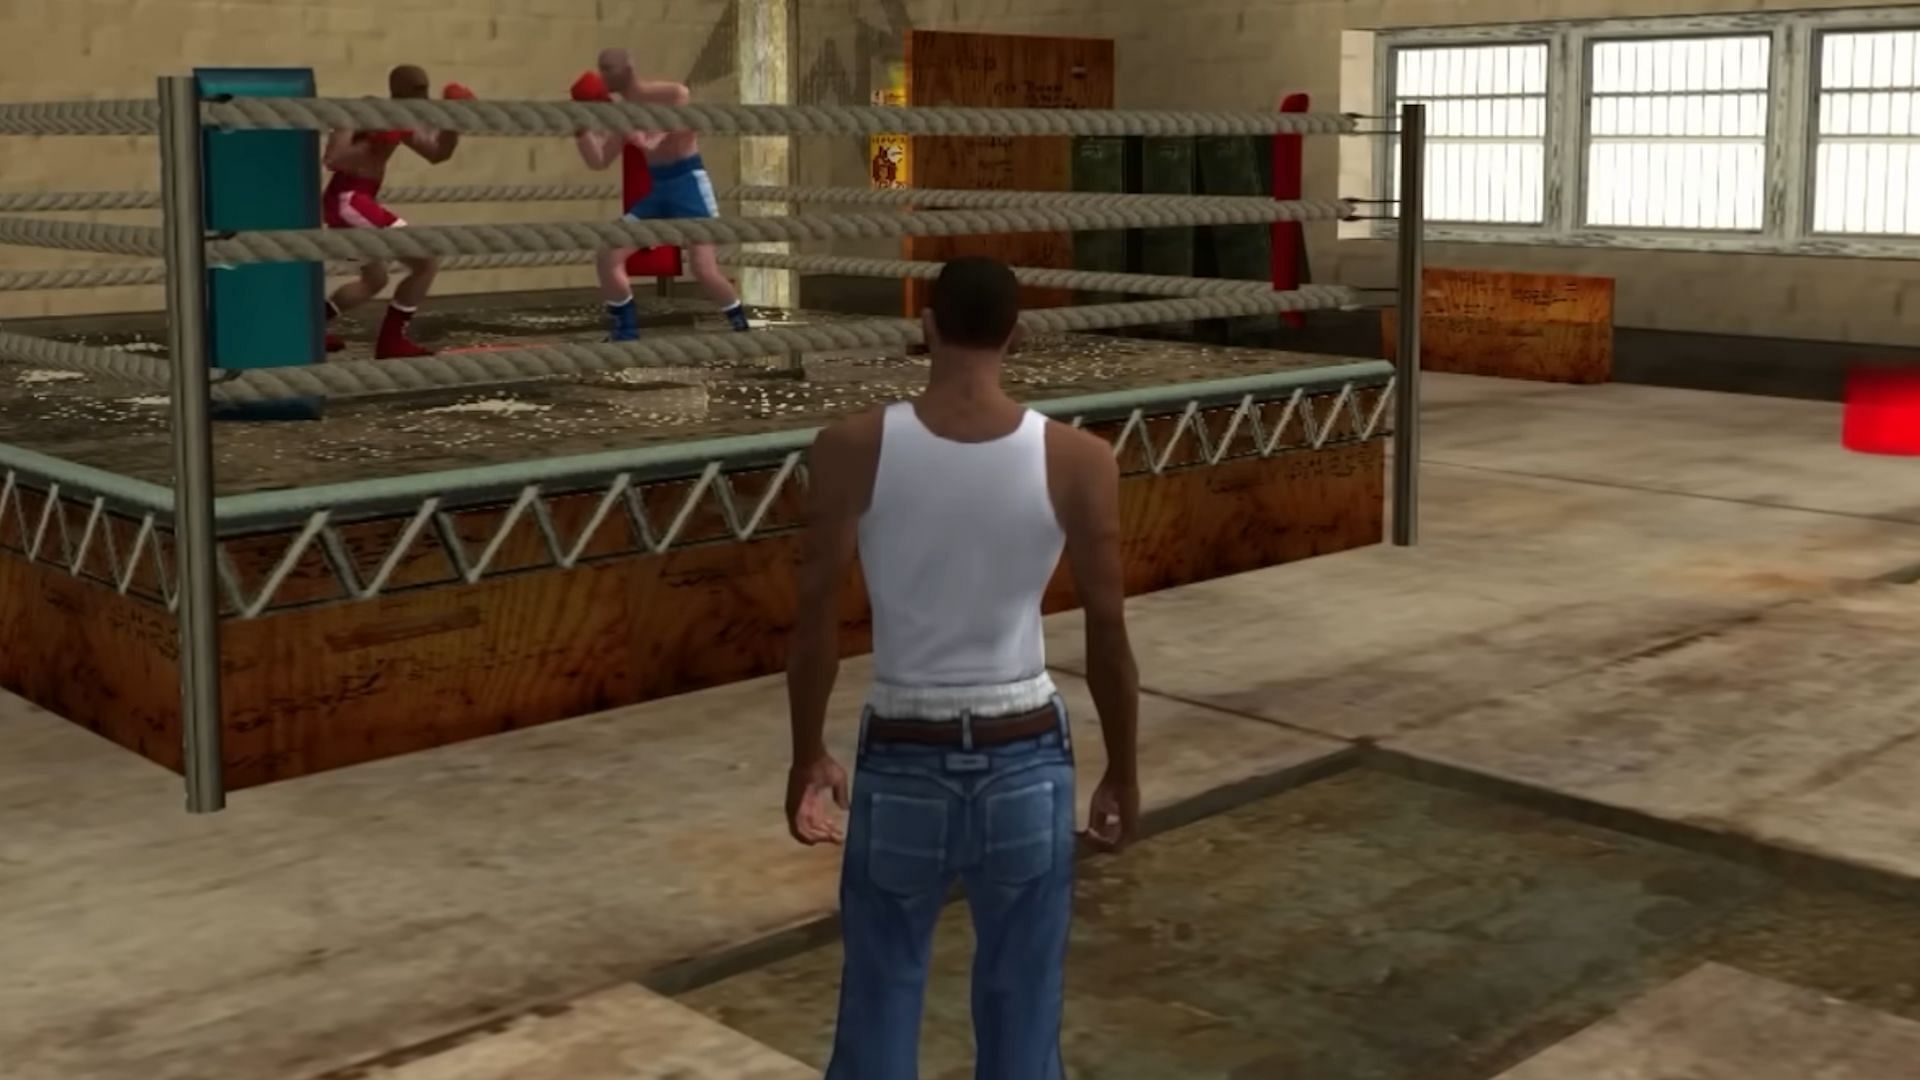 GTA San Andreas has several gameplay features that still feel innovative today (Image via Rockstar Games)